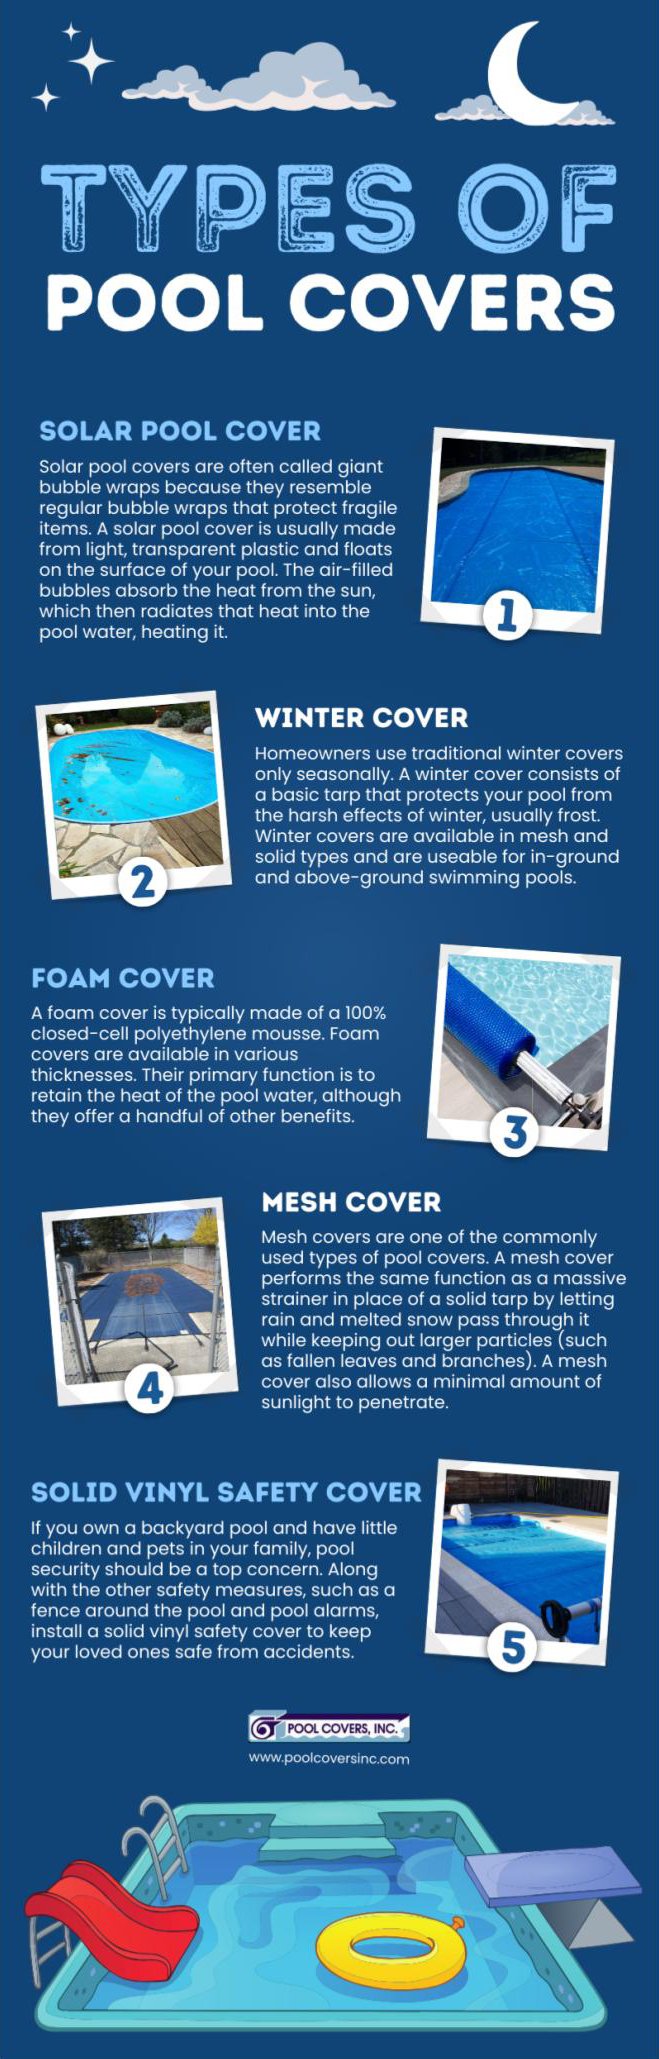 The Different Types of Pool Covers